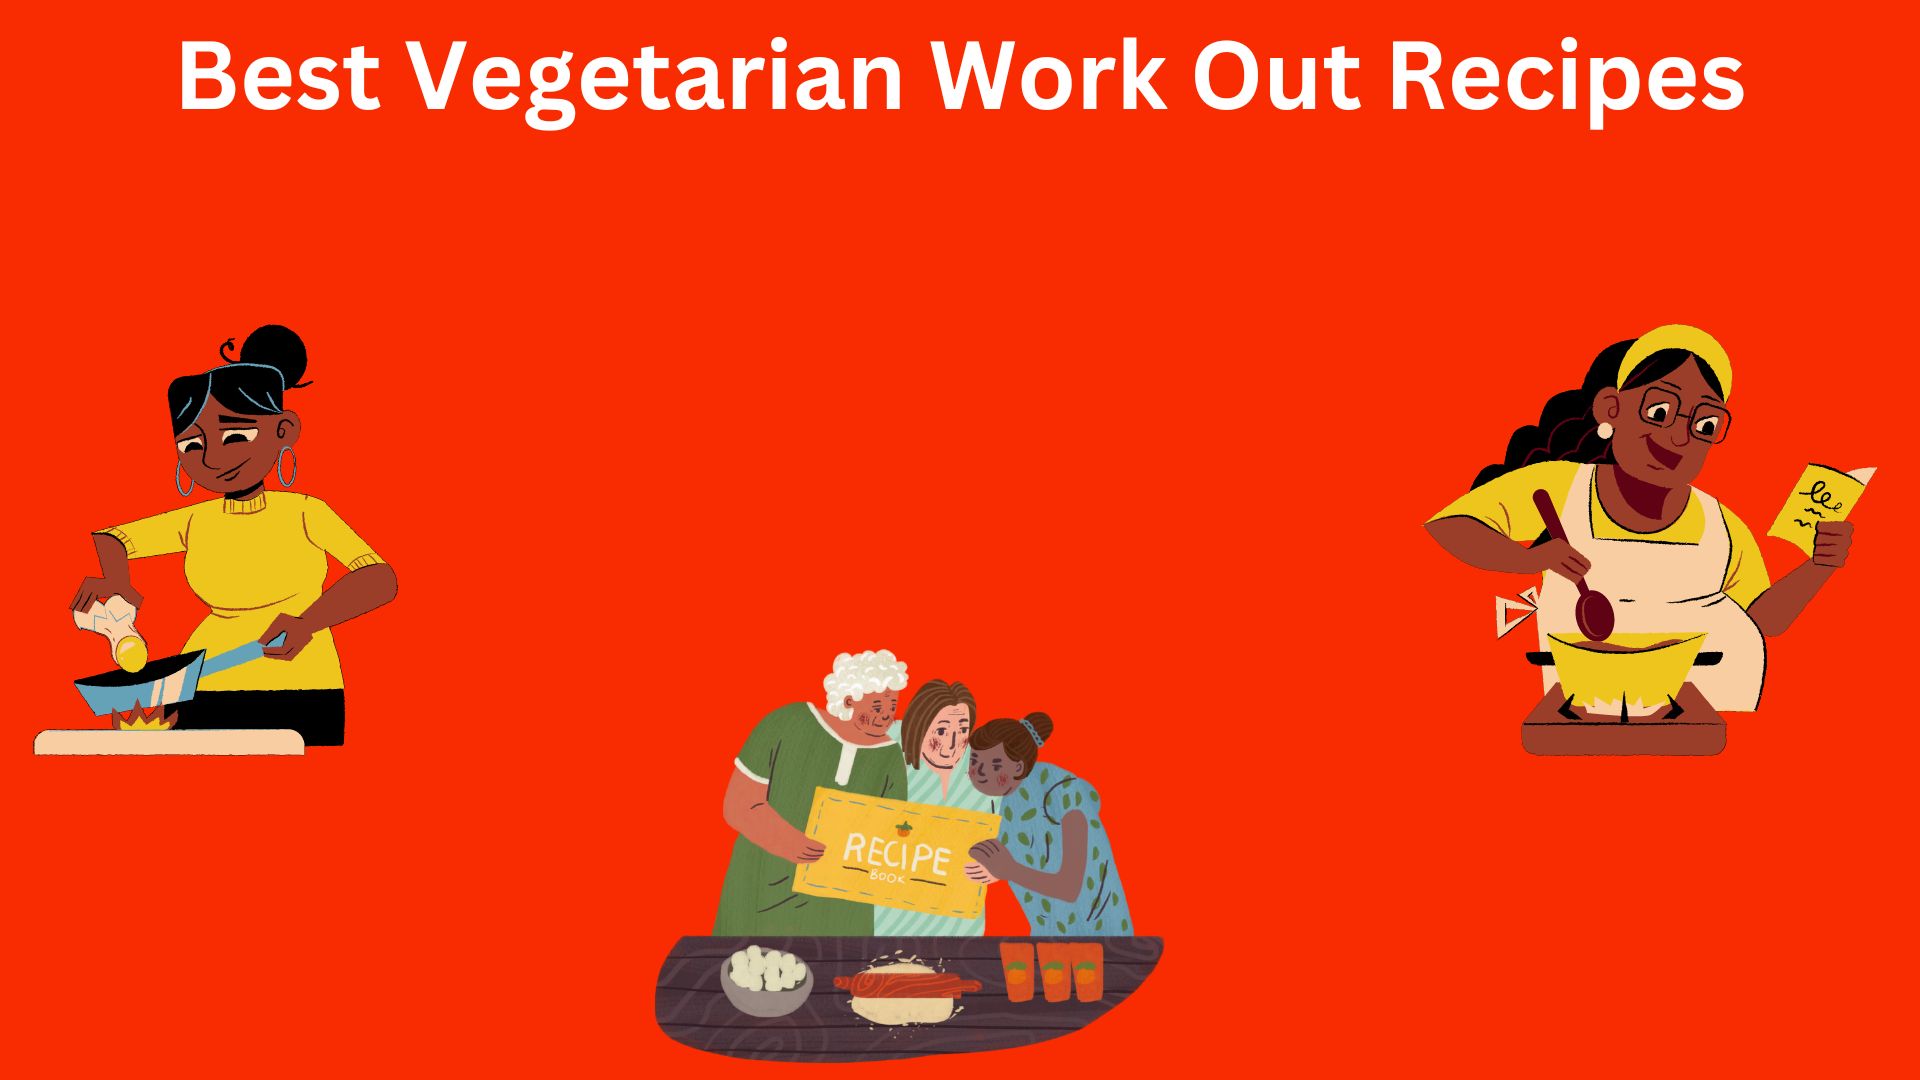 Best Vegetarian Work Out Recipes